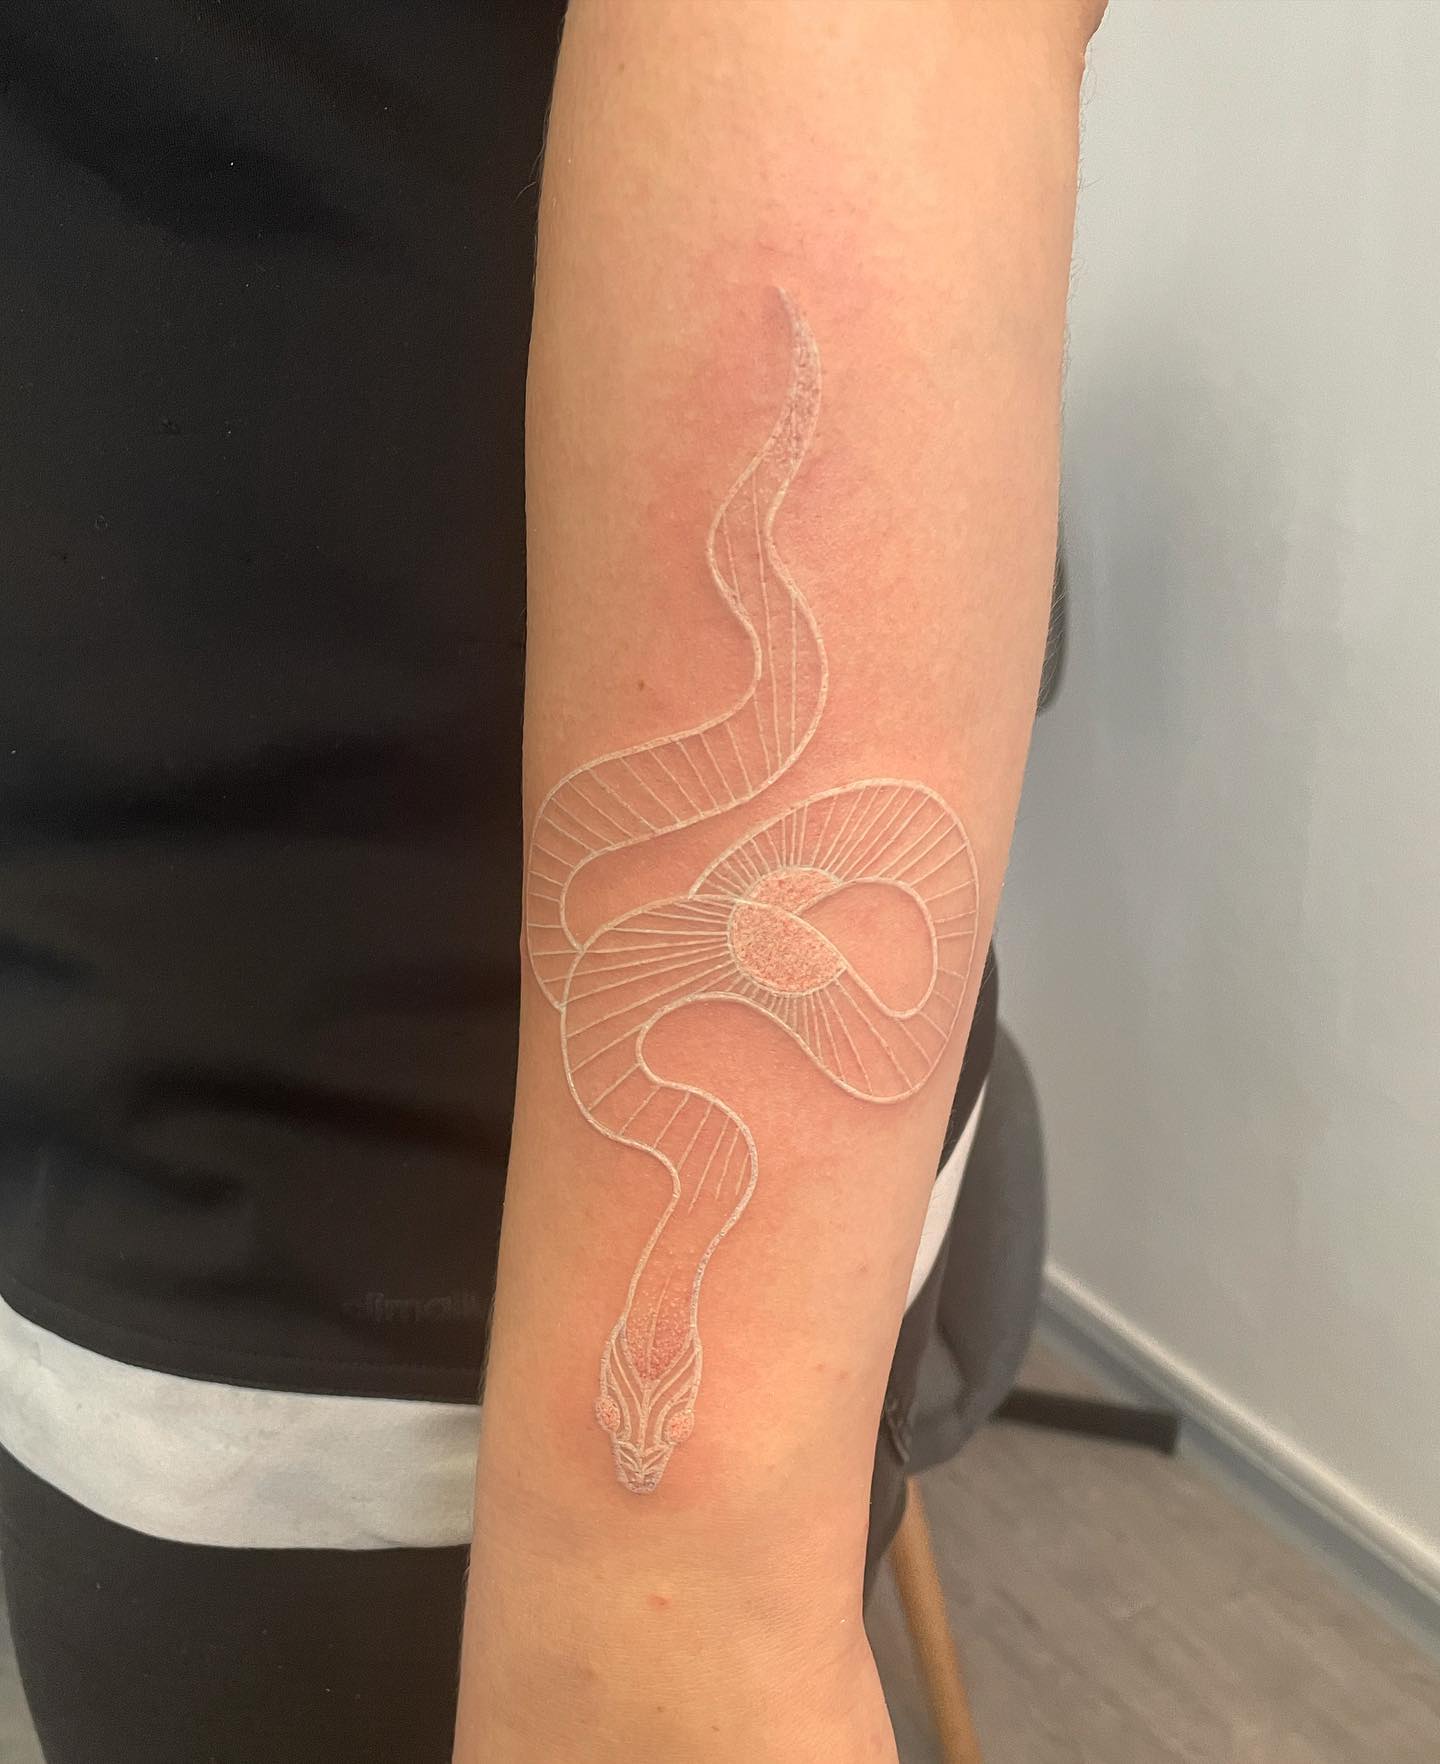 Snakes have been always a popular choice for those who want to get a tattoo because of their symbolism of rebirth, fertility and power. The way it looks like it's curling around your arm is amazing above.